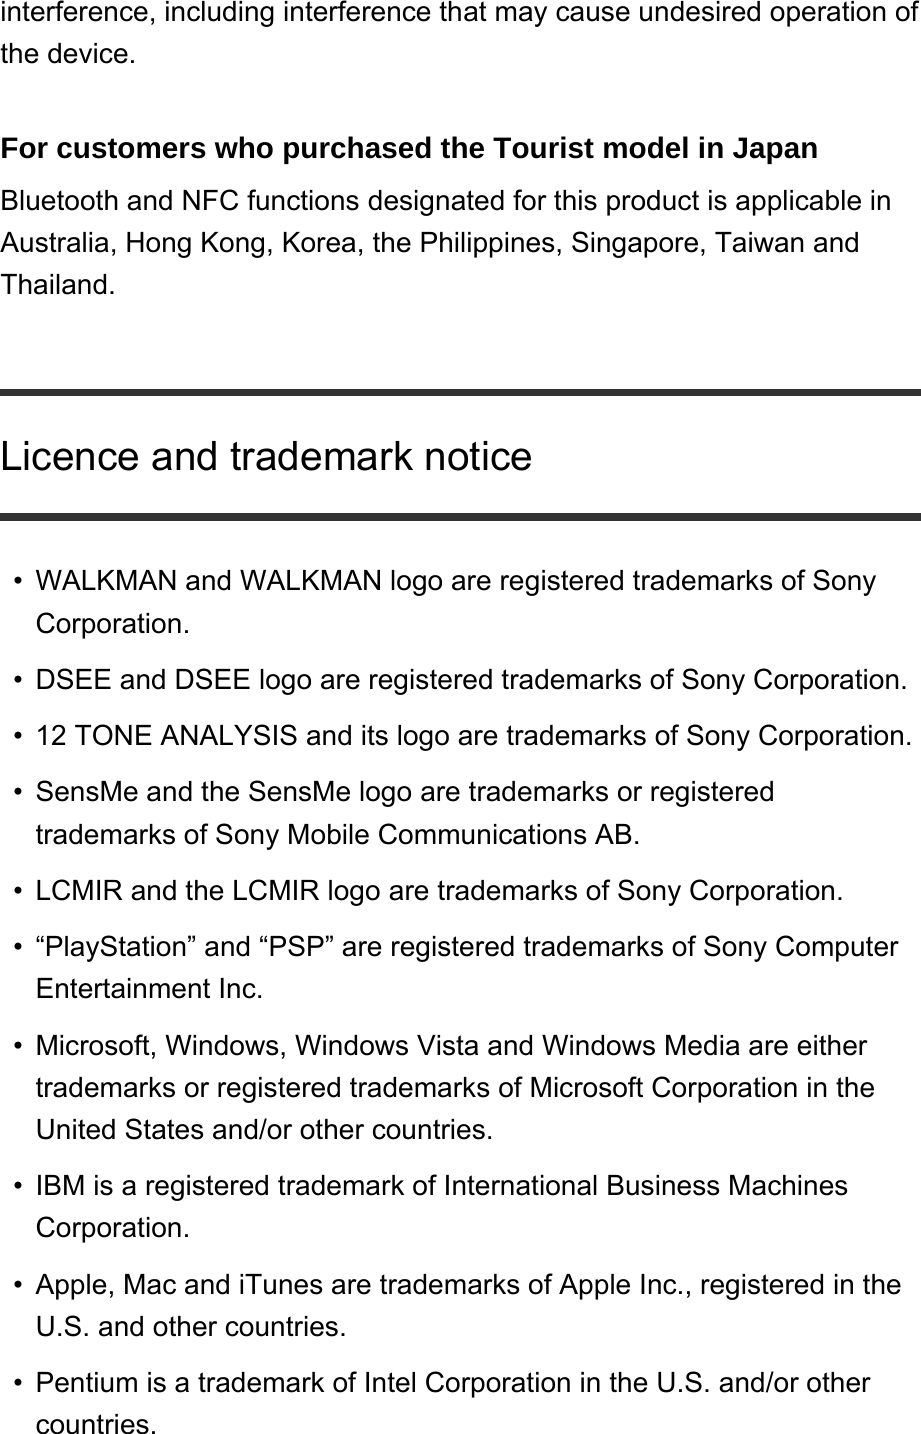 interference, including interference that may cause undesired operation of the device. For customers who purchased the Tourist model in Japan Bluetooth and NFC functions designated for this product is applicable in Australia, Hong Kong, Korea, the Philippines, Singapore, Taiwan and Thailand. Licence and trademark noticeWALKMAN and WALKMAN logo are registered trademarks of Sony Corporation. •DSEE and DSEE logo are registered trademarks of Sony Corporation. •12 TONE ANALYSIS and its logo are trademarks of Sony Corporation. •SensMe and the SensMe logo are trademarks or registered trademarks of Sony Mobile Communications AB. •LCMIR and the LCMIR logo are trademarks of Sony Corporation. •“PlayStation” and “PSP” are registered trademarks of Sony Computer Entertainment Inc. •Microsoft, Windows, Windows Vista and Windows Media are either trademarks or registered trademarks of Microsoft Corporation in the United States and/or other countries. •IBM is a registered trademark of International Business Machines Corporation. •Apple, Mac and iTunes are trademarks of Apple Inc., registered in the U.S. and other countries. •Pentium is a trademark of Intel Corporation in the U.S. and/or other countries. •